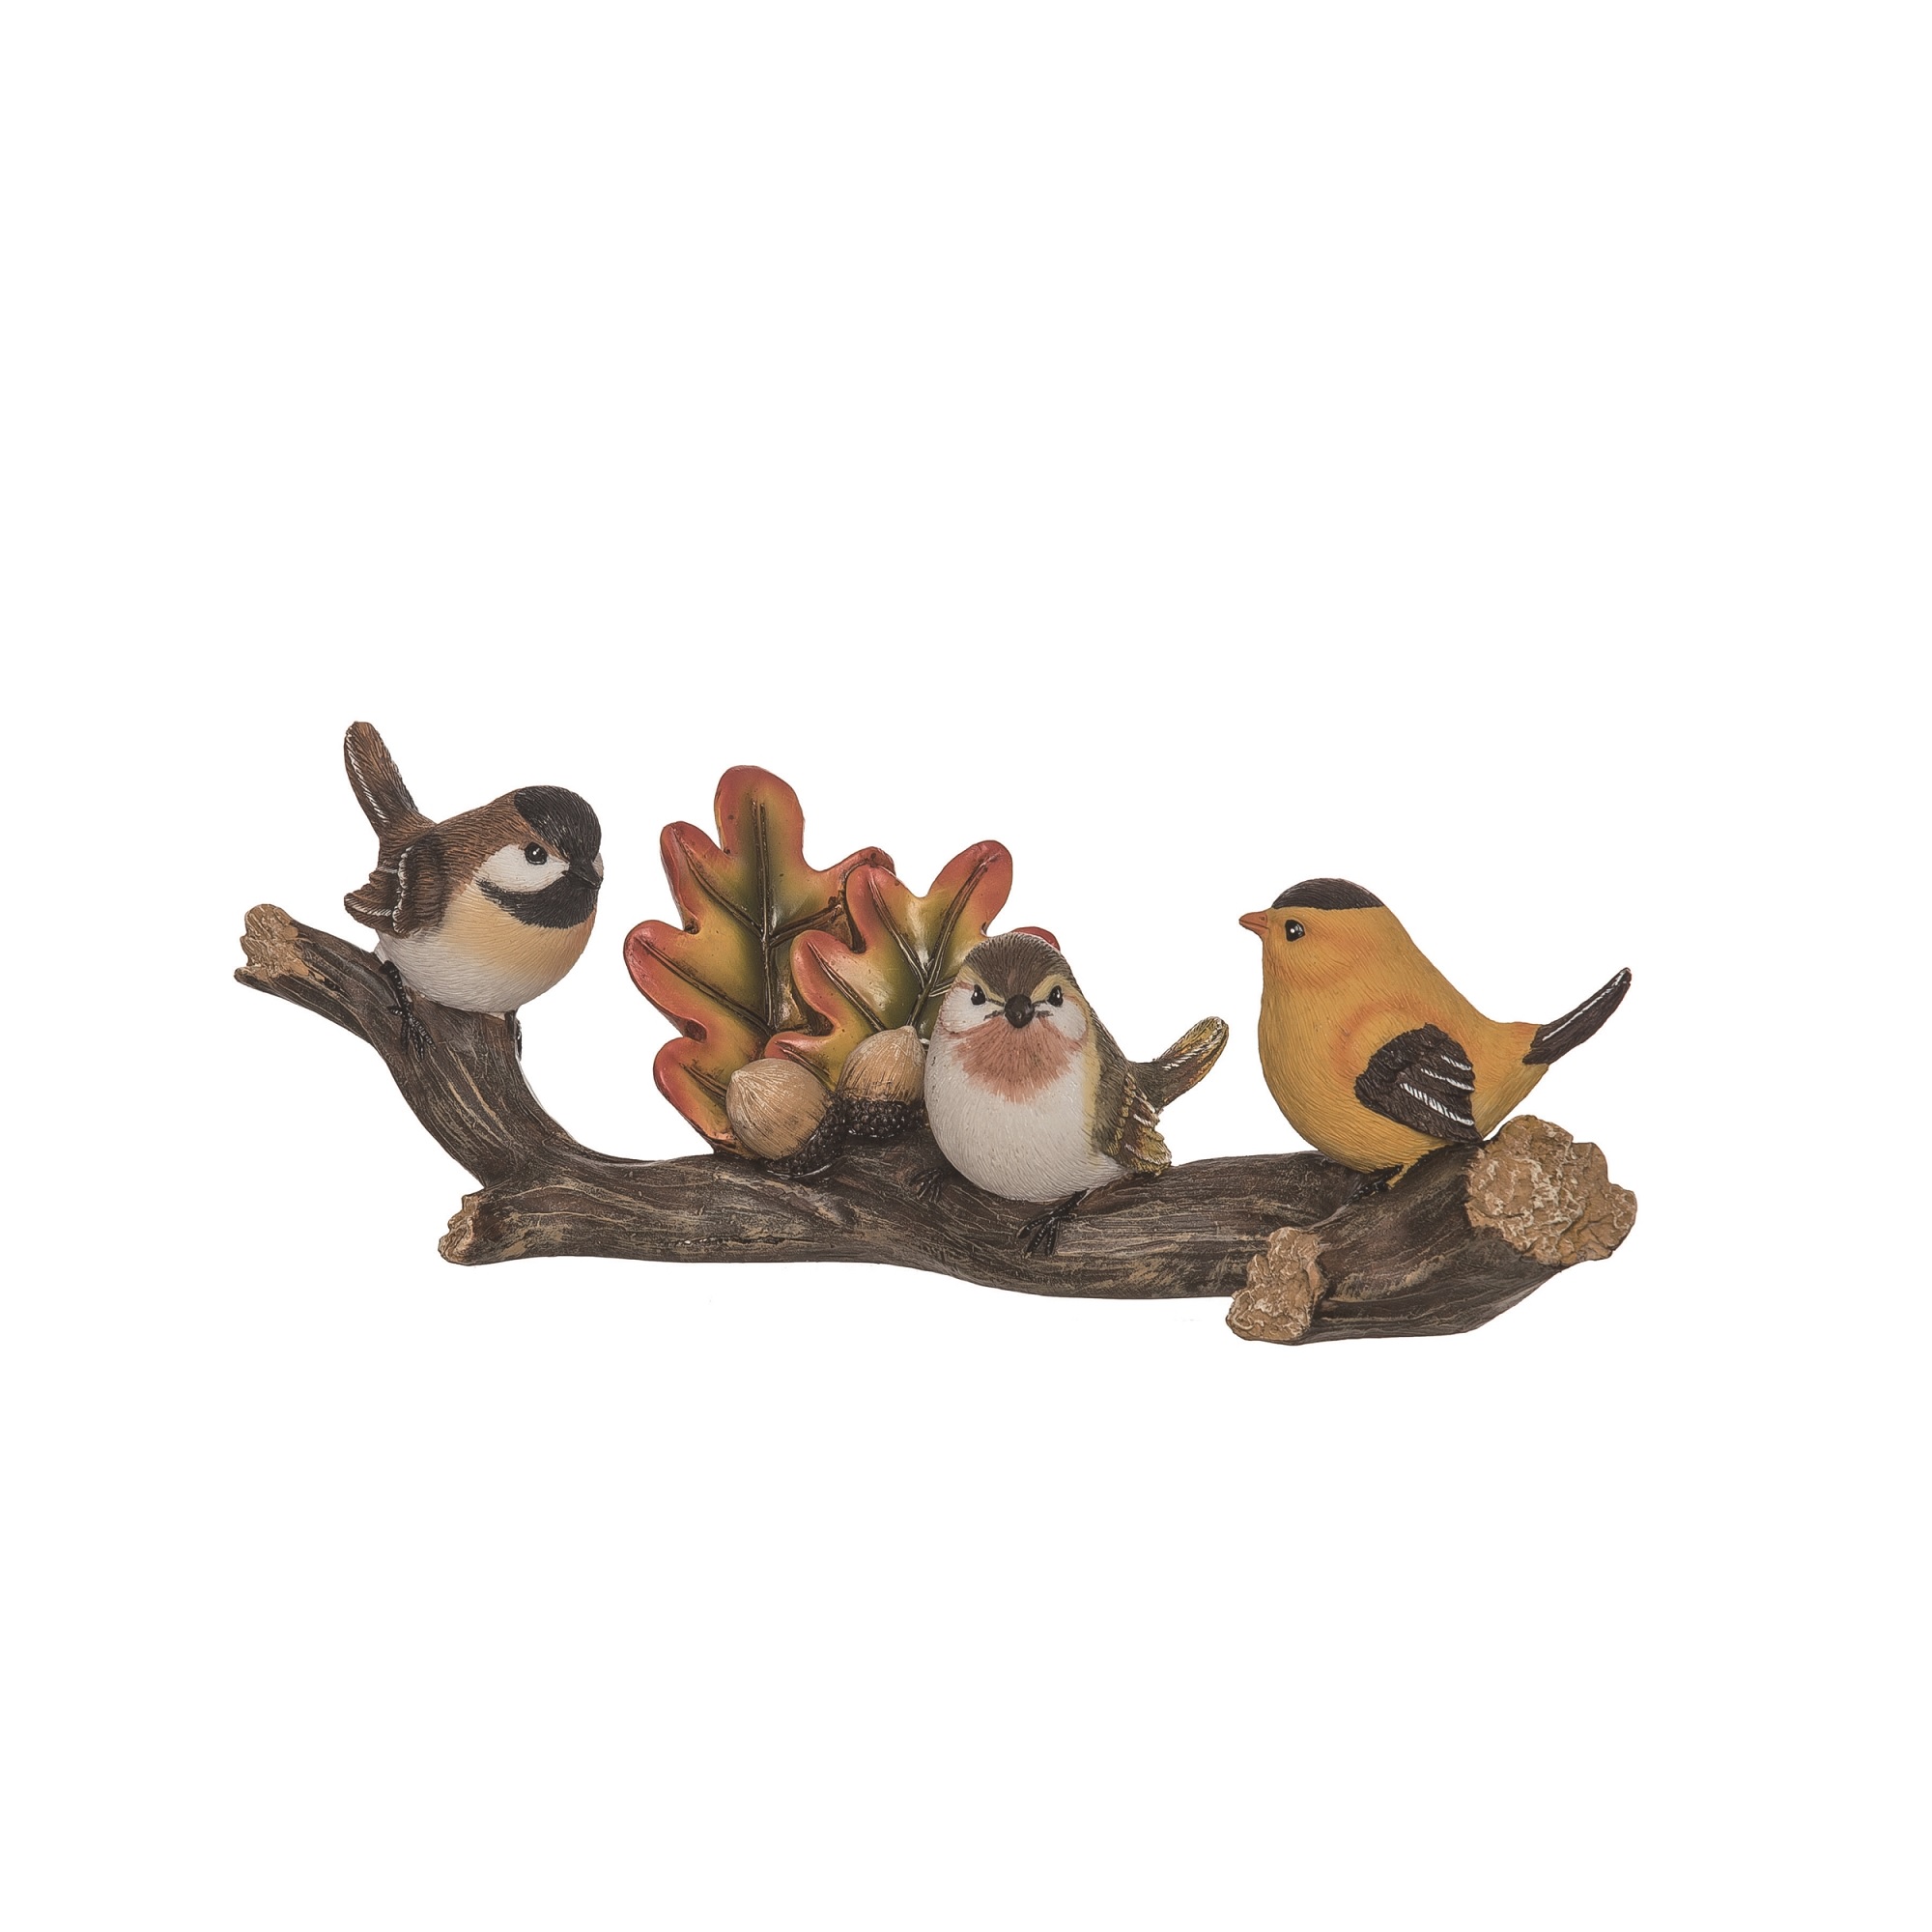 Contemporary Home Living 12.75" Multi-Color Birds on Branch Fall Harvest Figurine